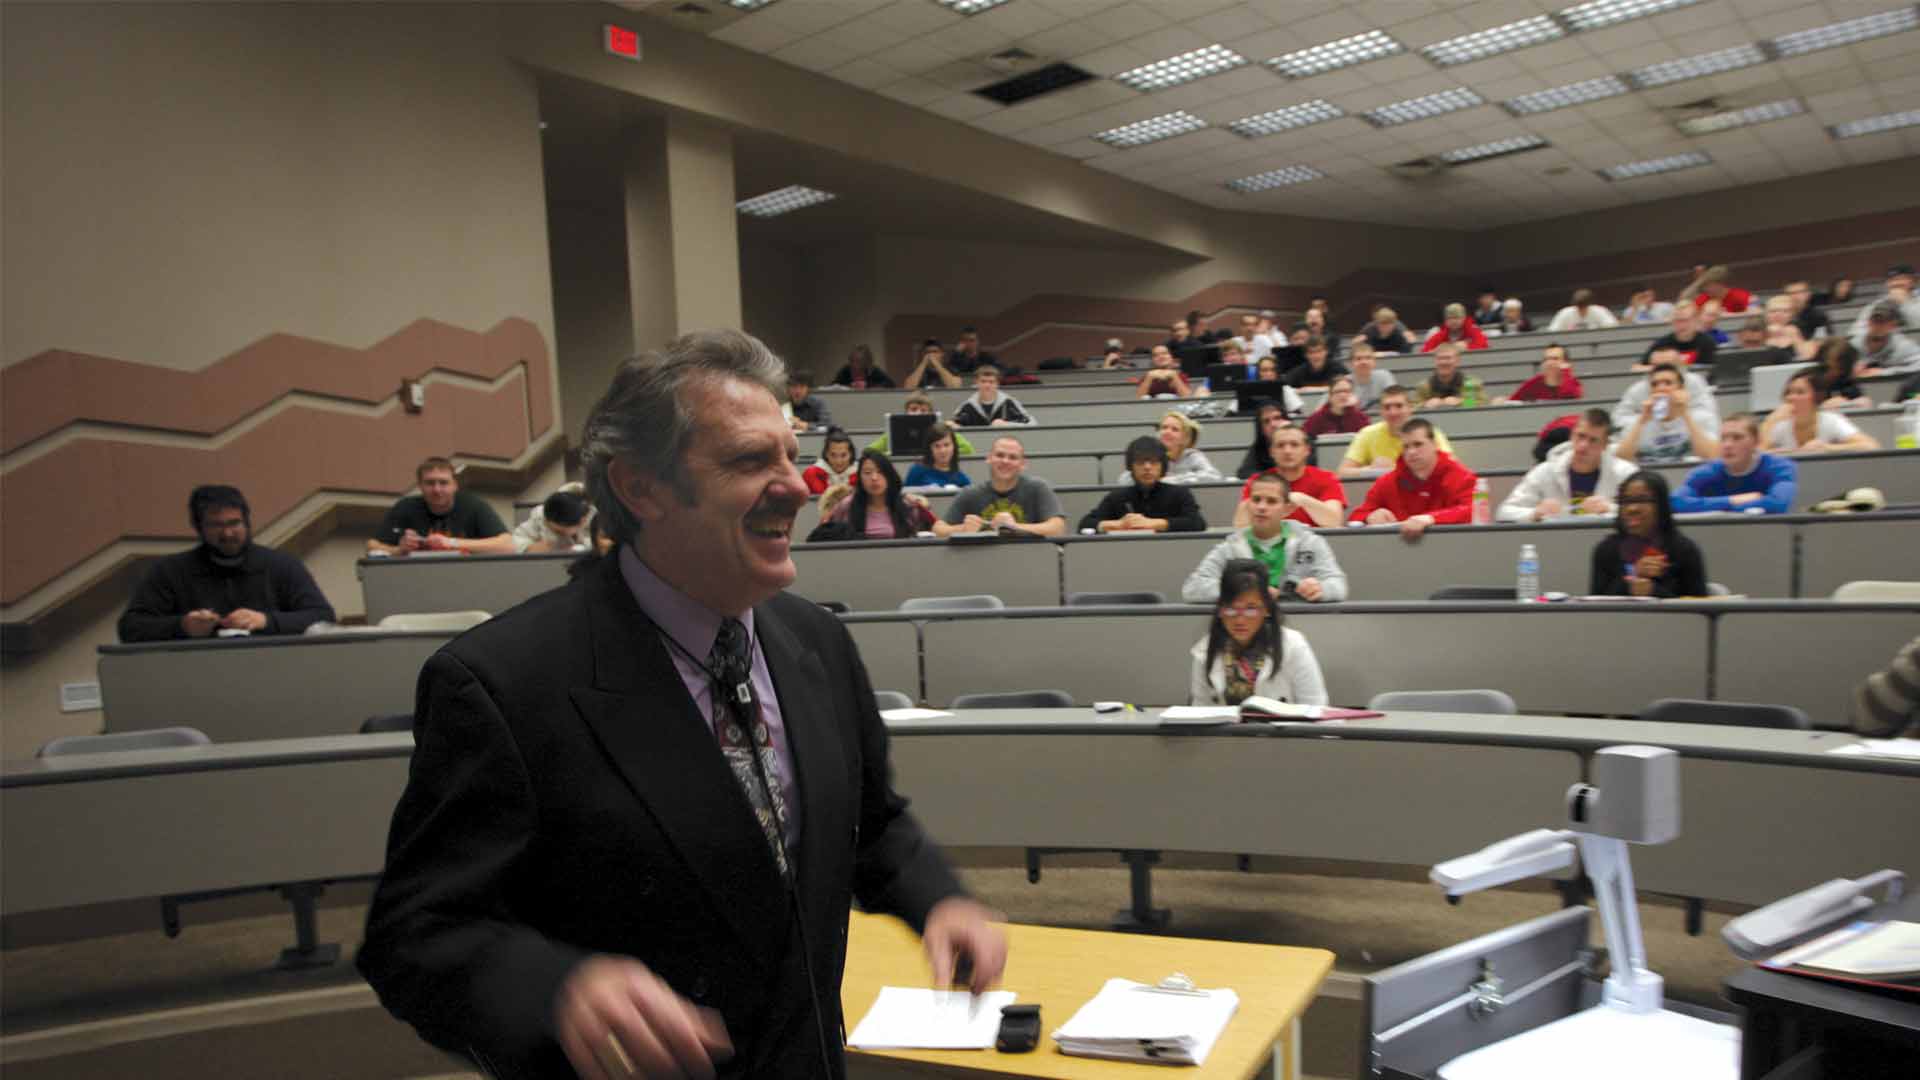 A smiling professor and his class during a lecture